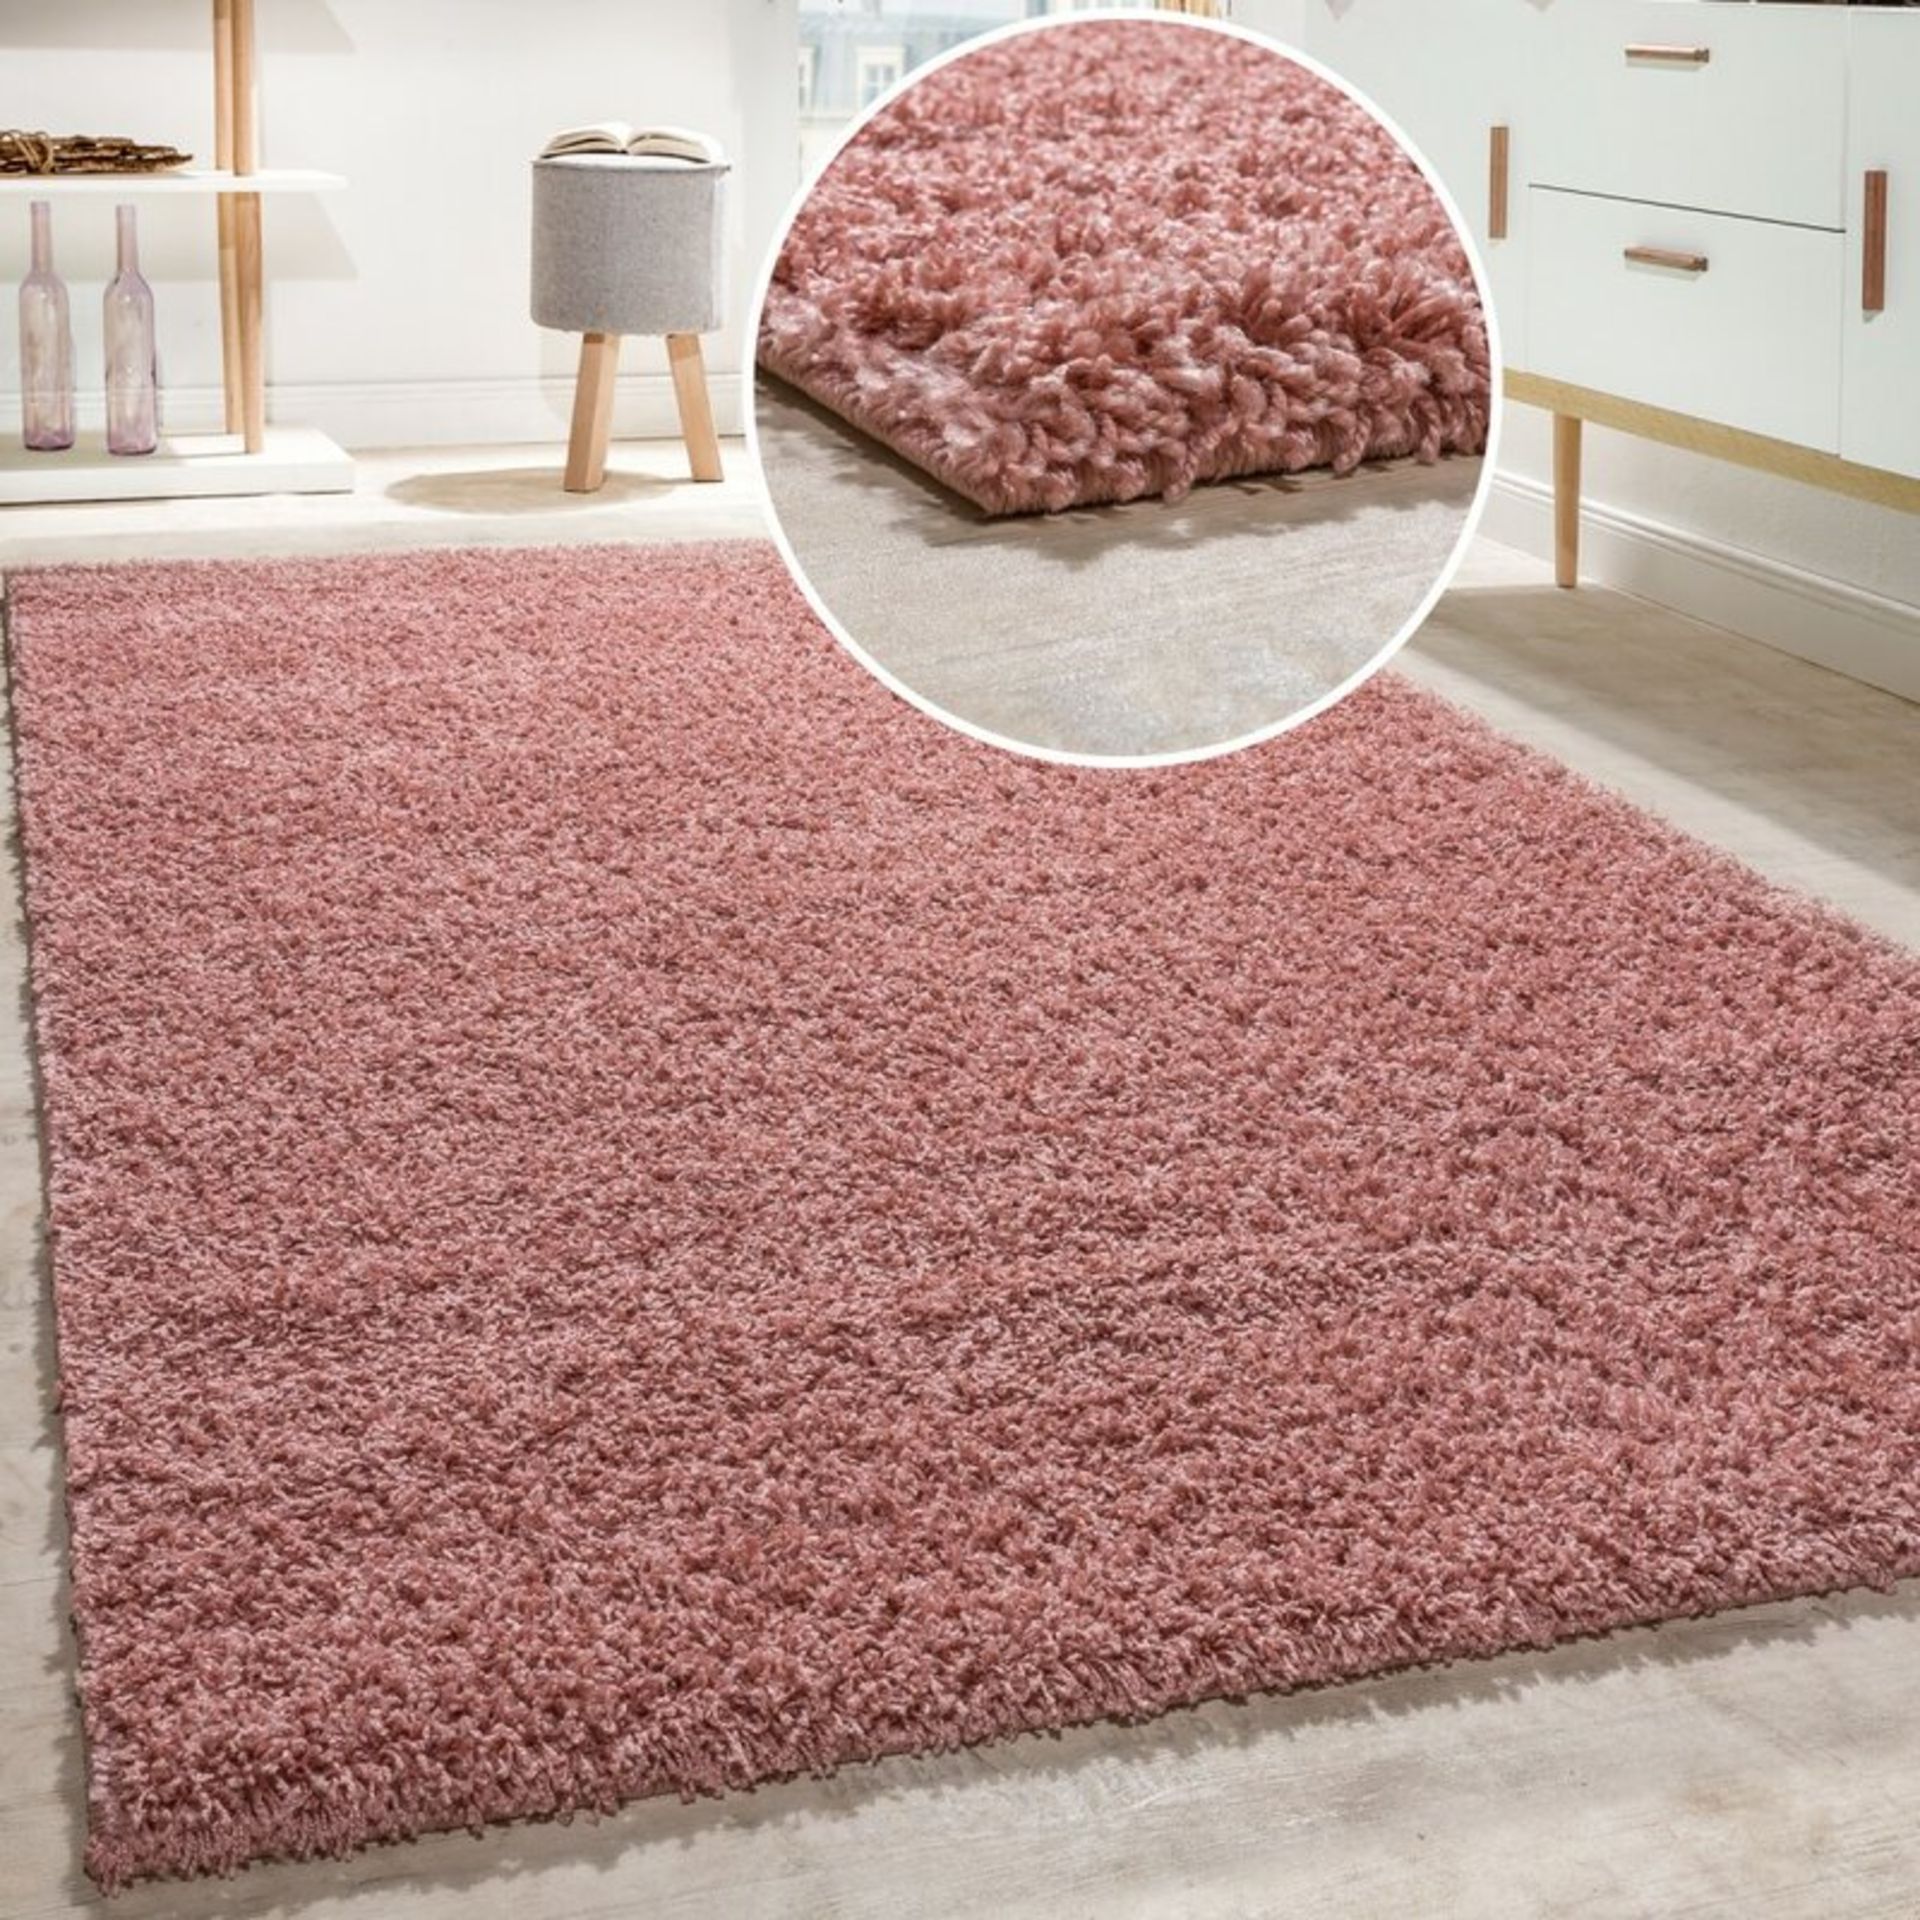 Epperson Shag Pink Rug - RRP £87.99